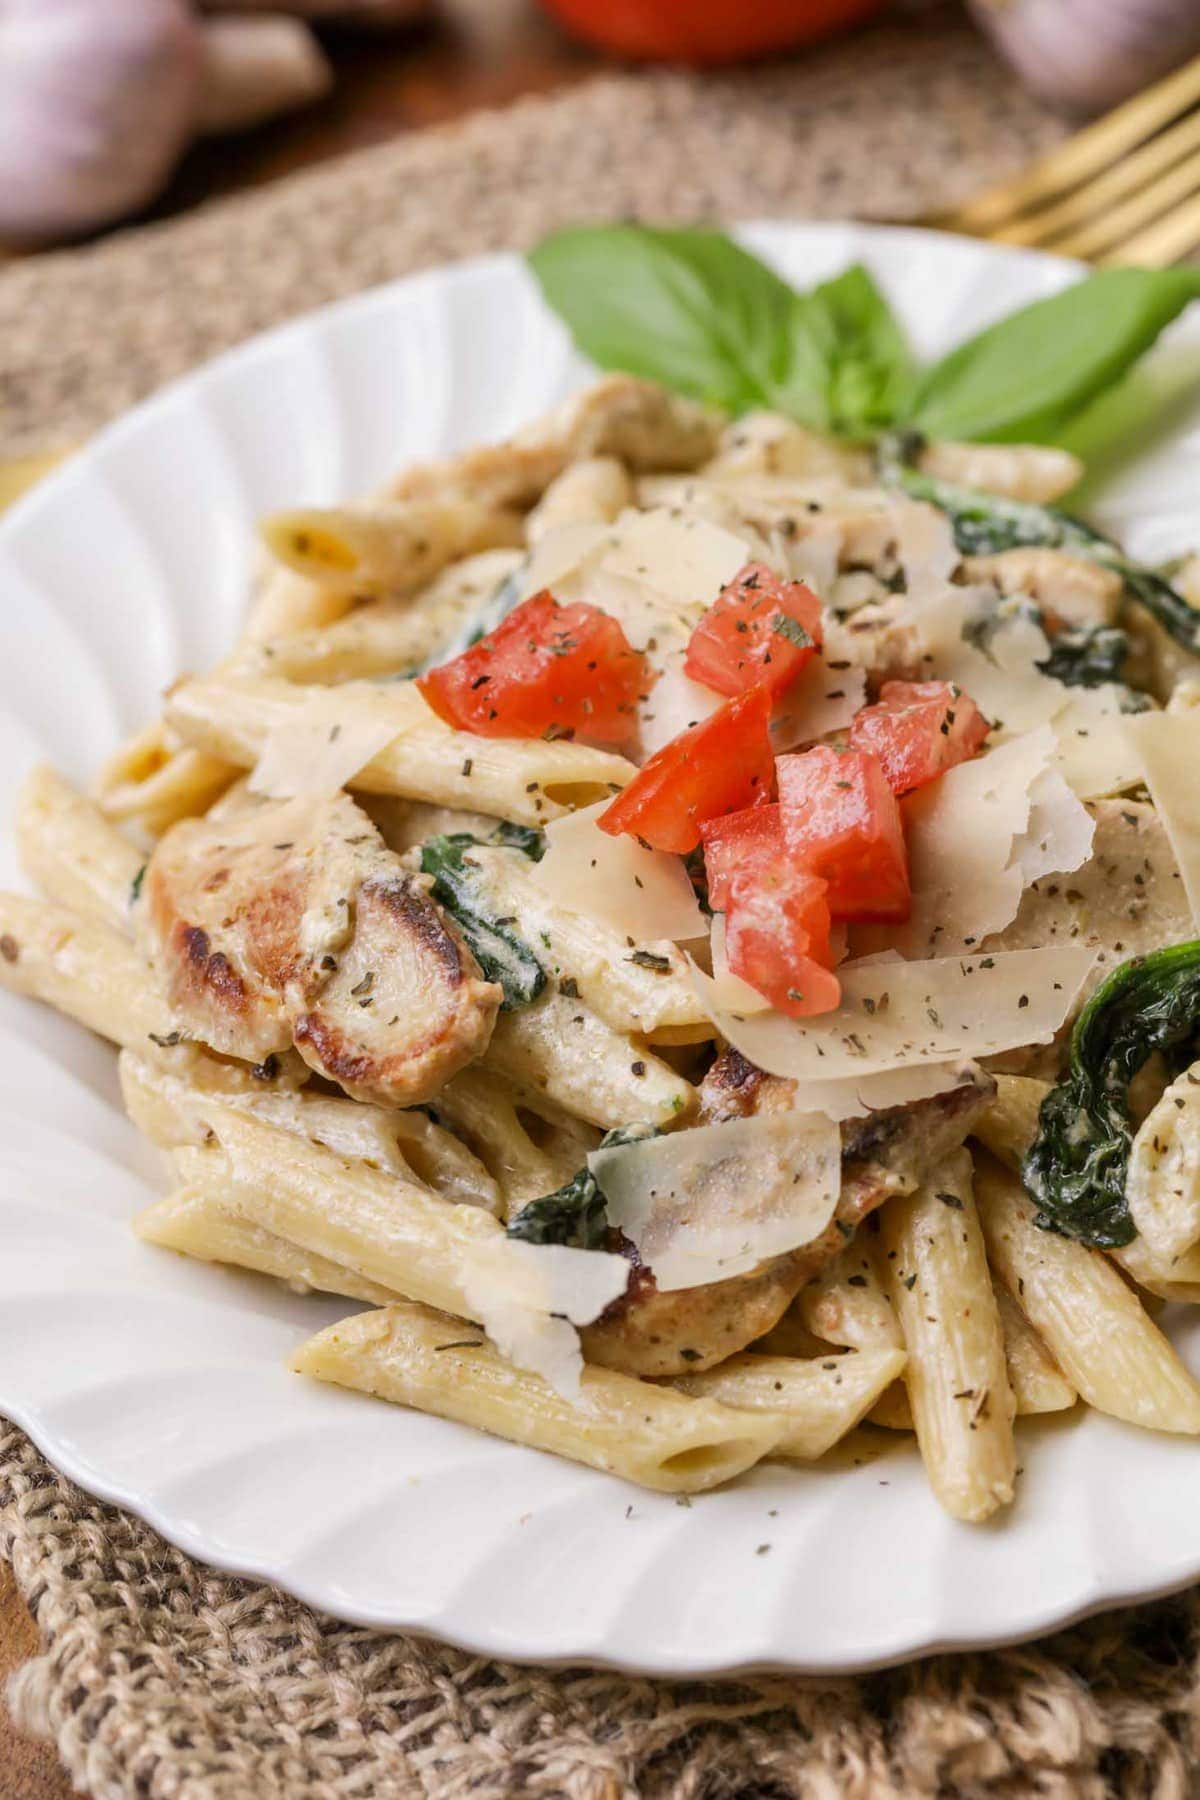 Chicken Florentine garnished with fresh diced tomatoes